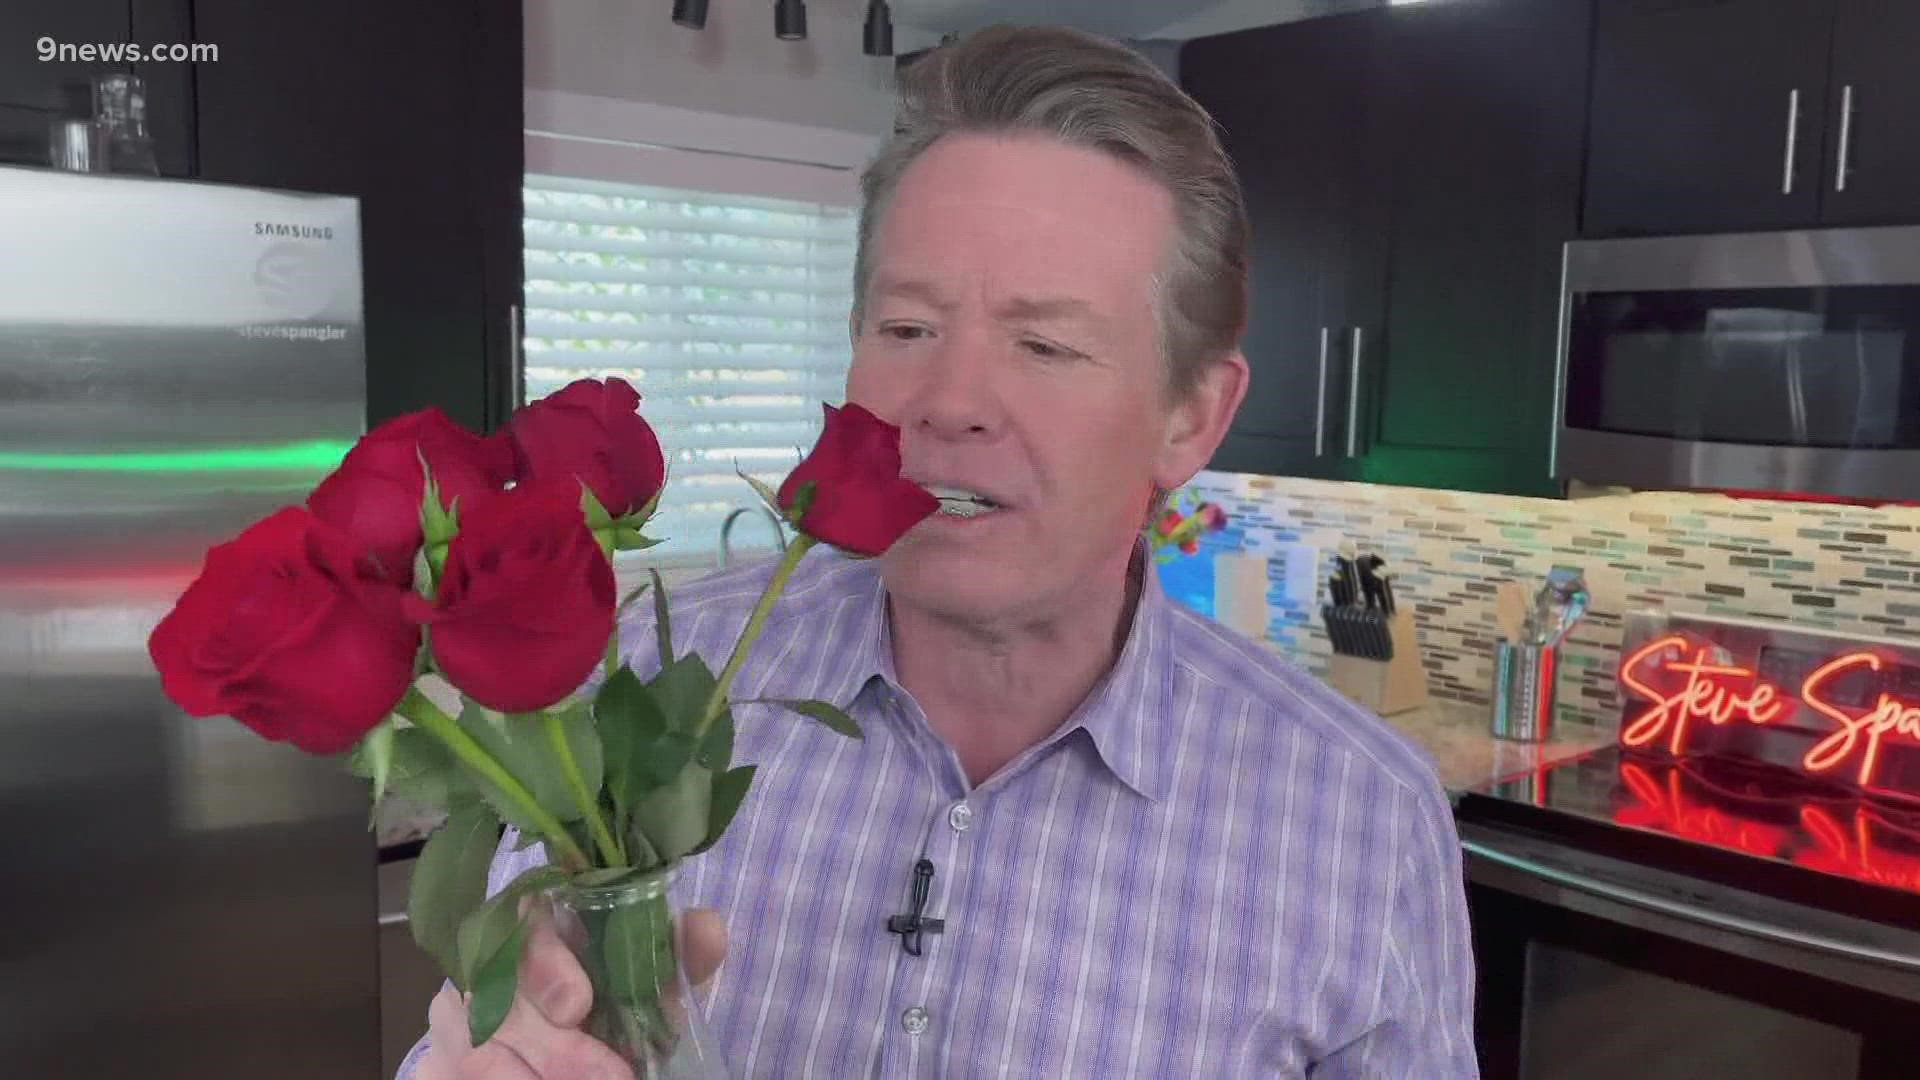 With Valentine's Day right around the corner, Science Guy Steve Spangler uses science to determine the best way to keep those flowers fresh.